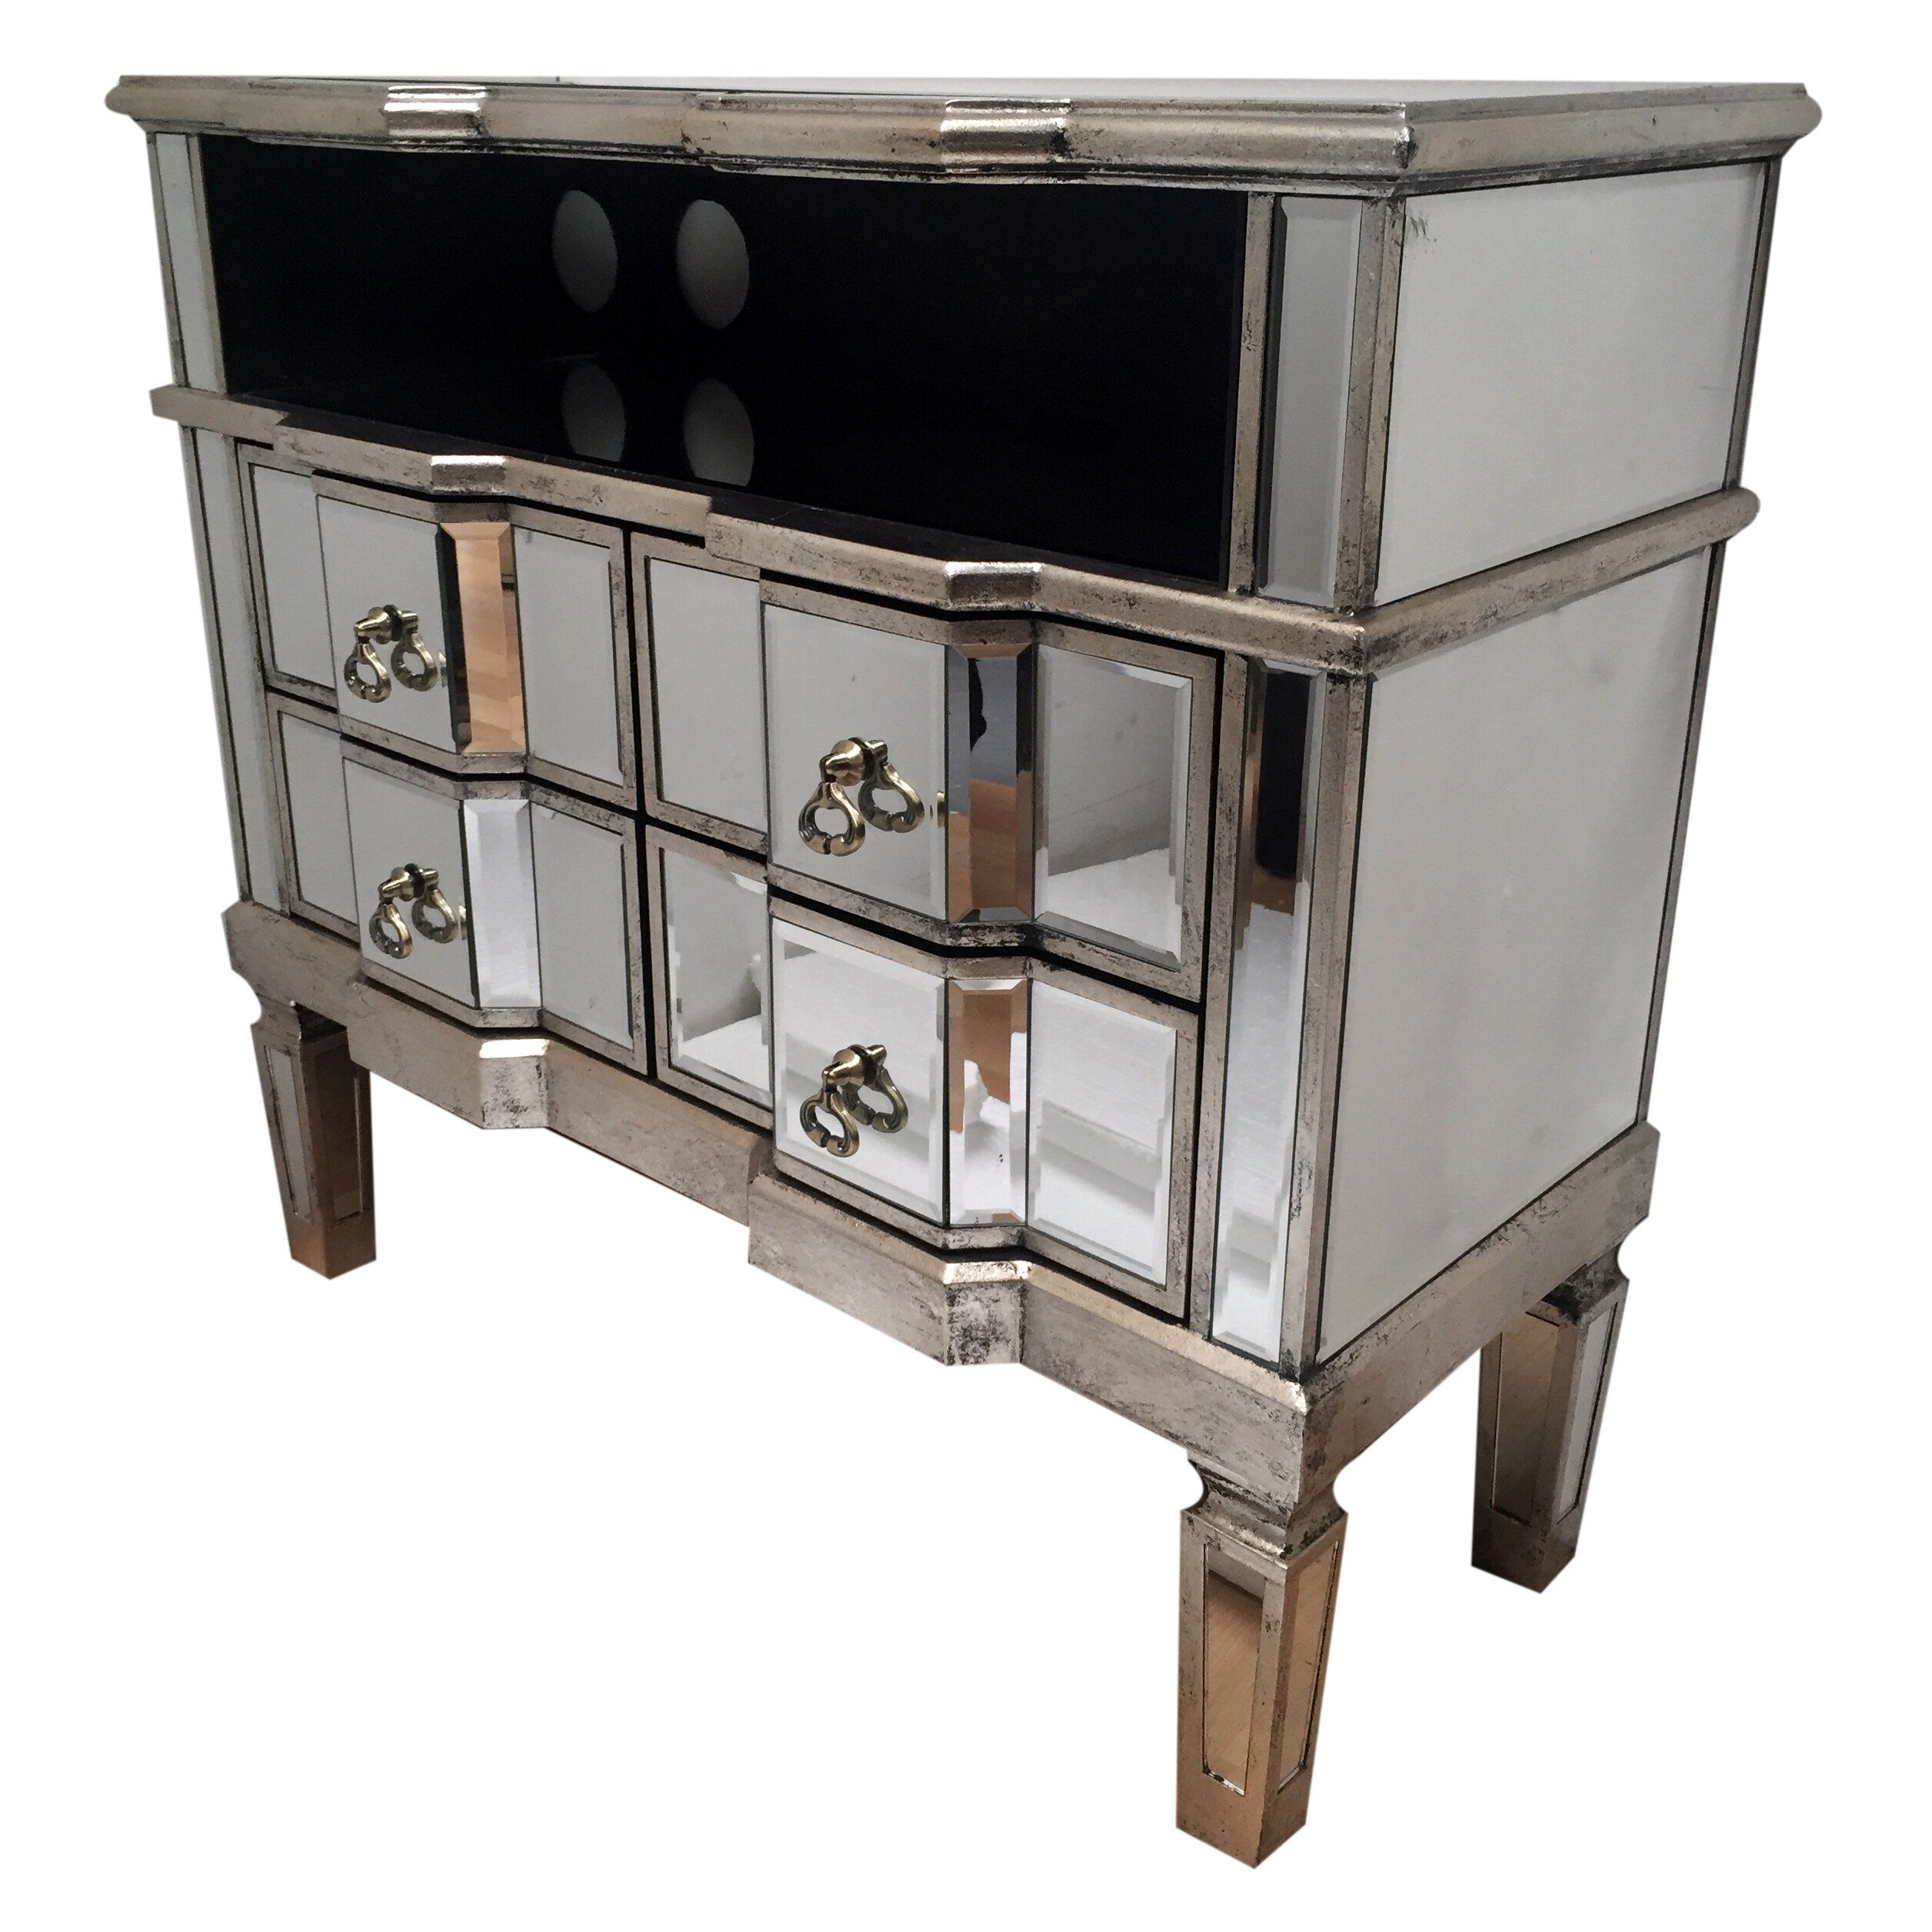 Alterton Vintage Mirrored Tv Cabinets & Reviews | Wayfair With Regard To Mirrored Furniture Tv Unit (View 4 of 15)